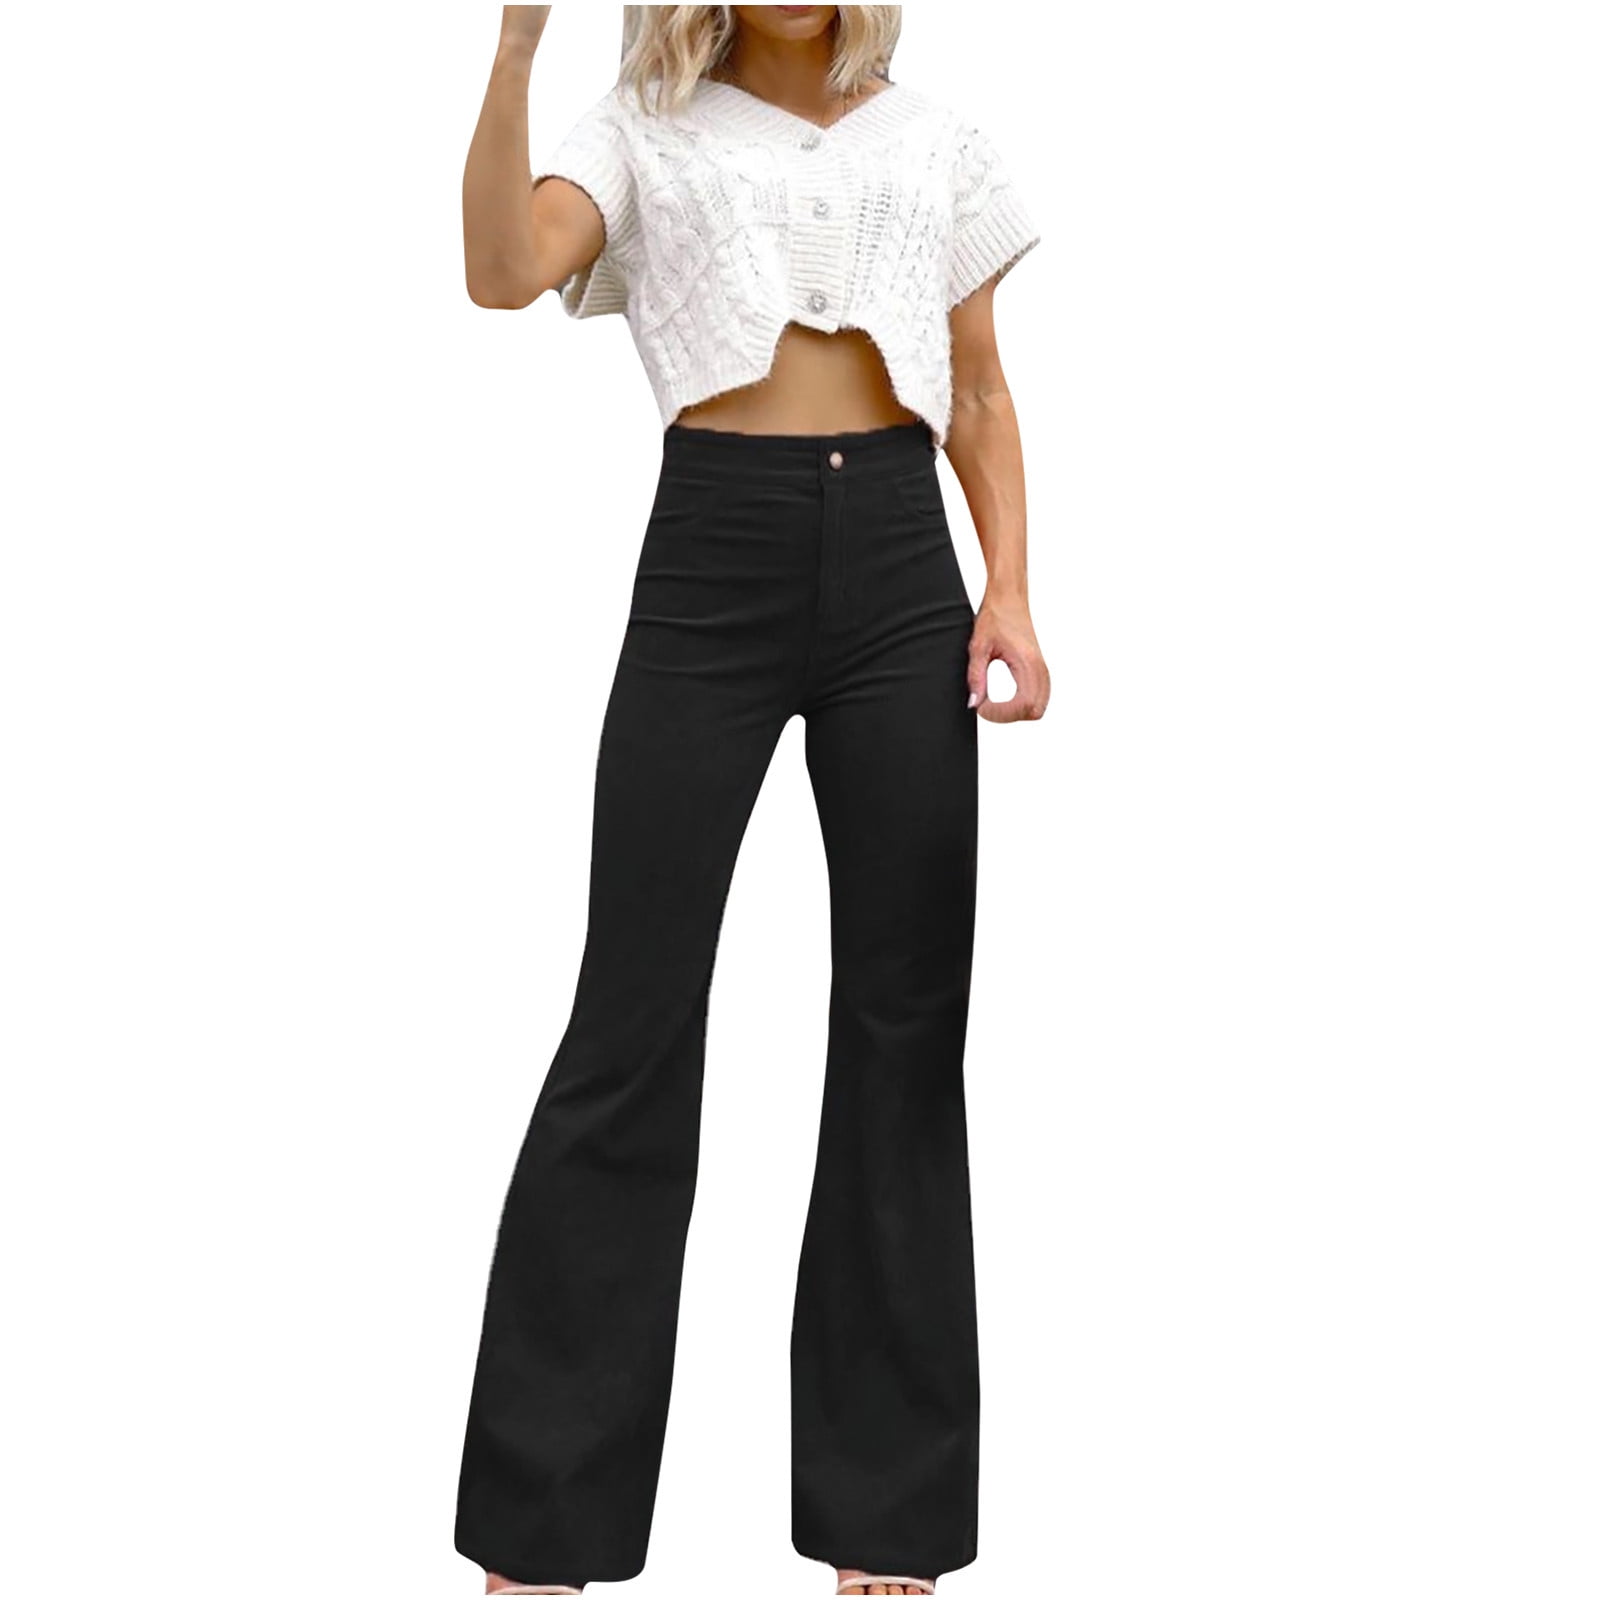 Women's Flare Pants Corduroy High Waisted Pants Bell Bottom Trousers 